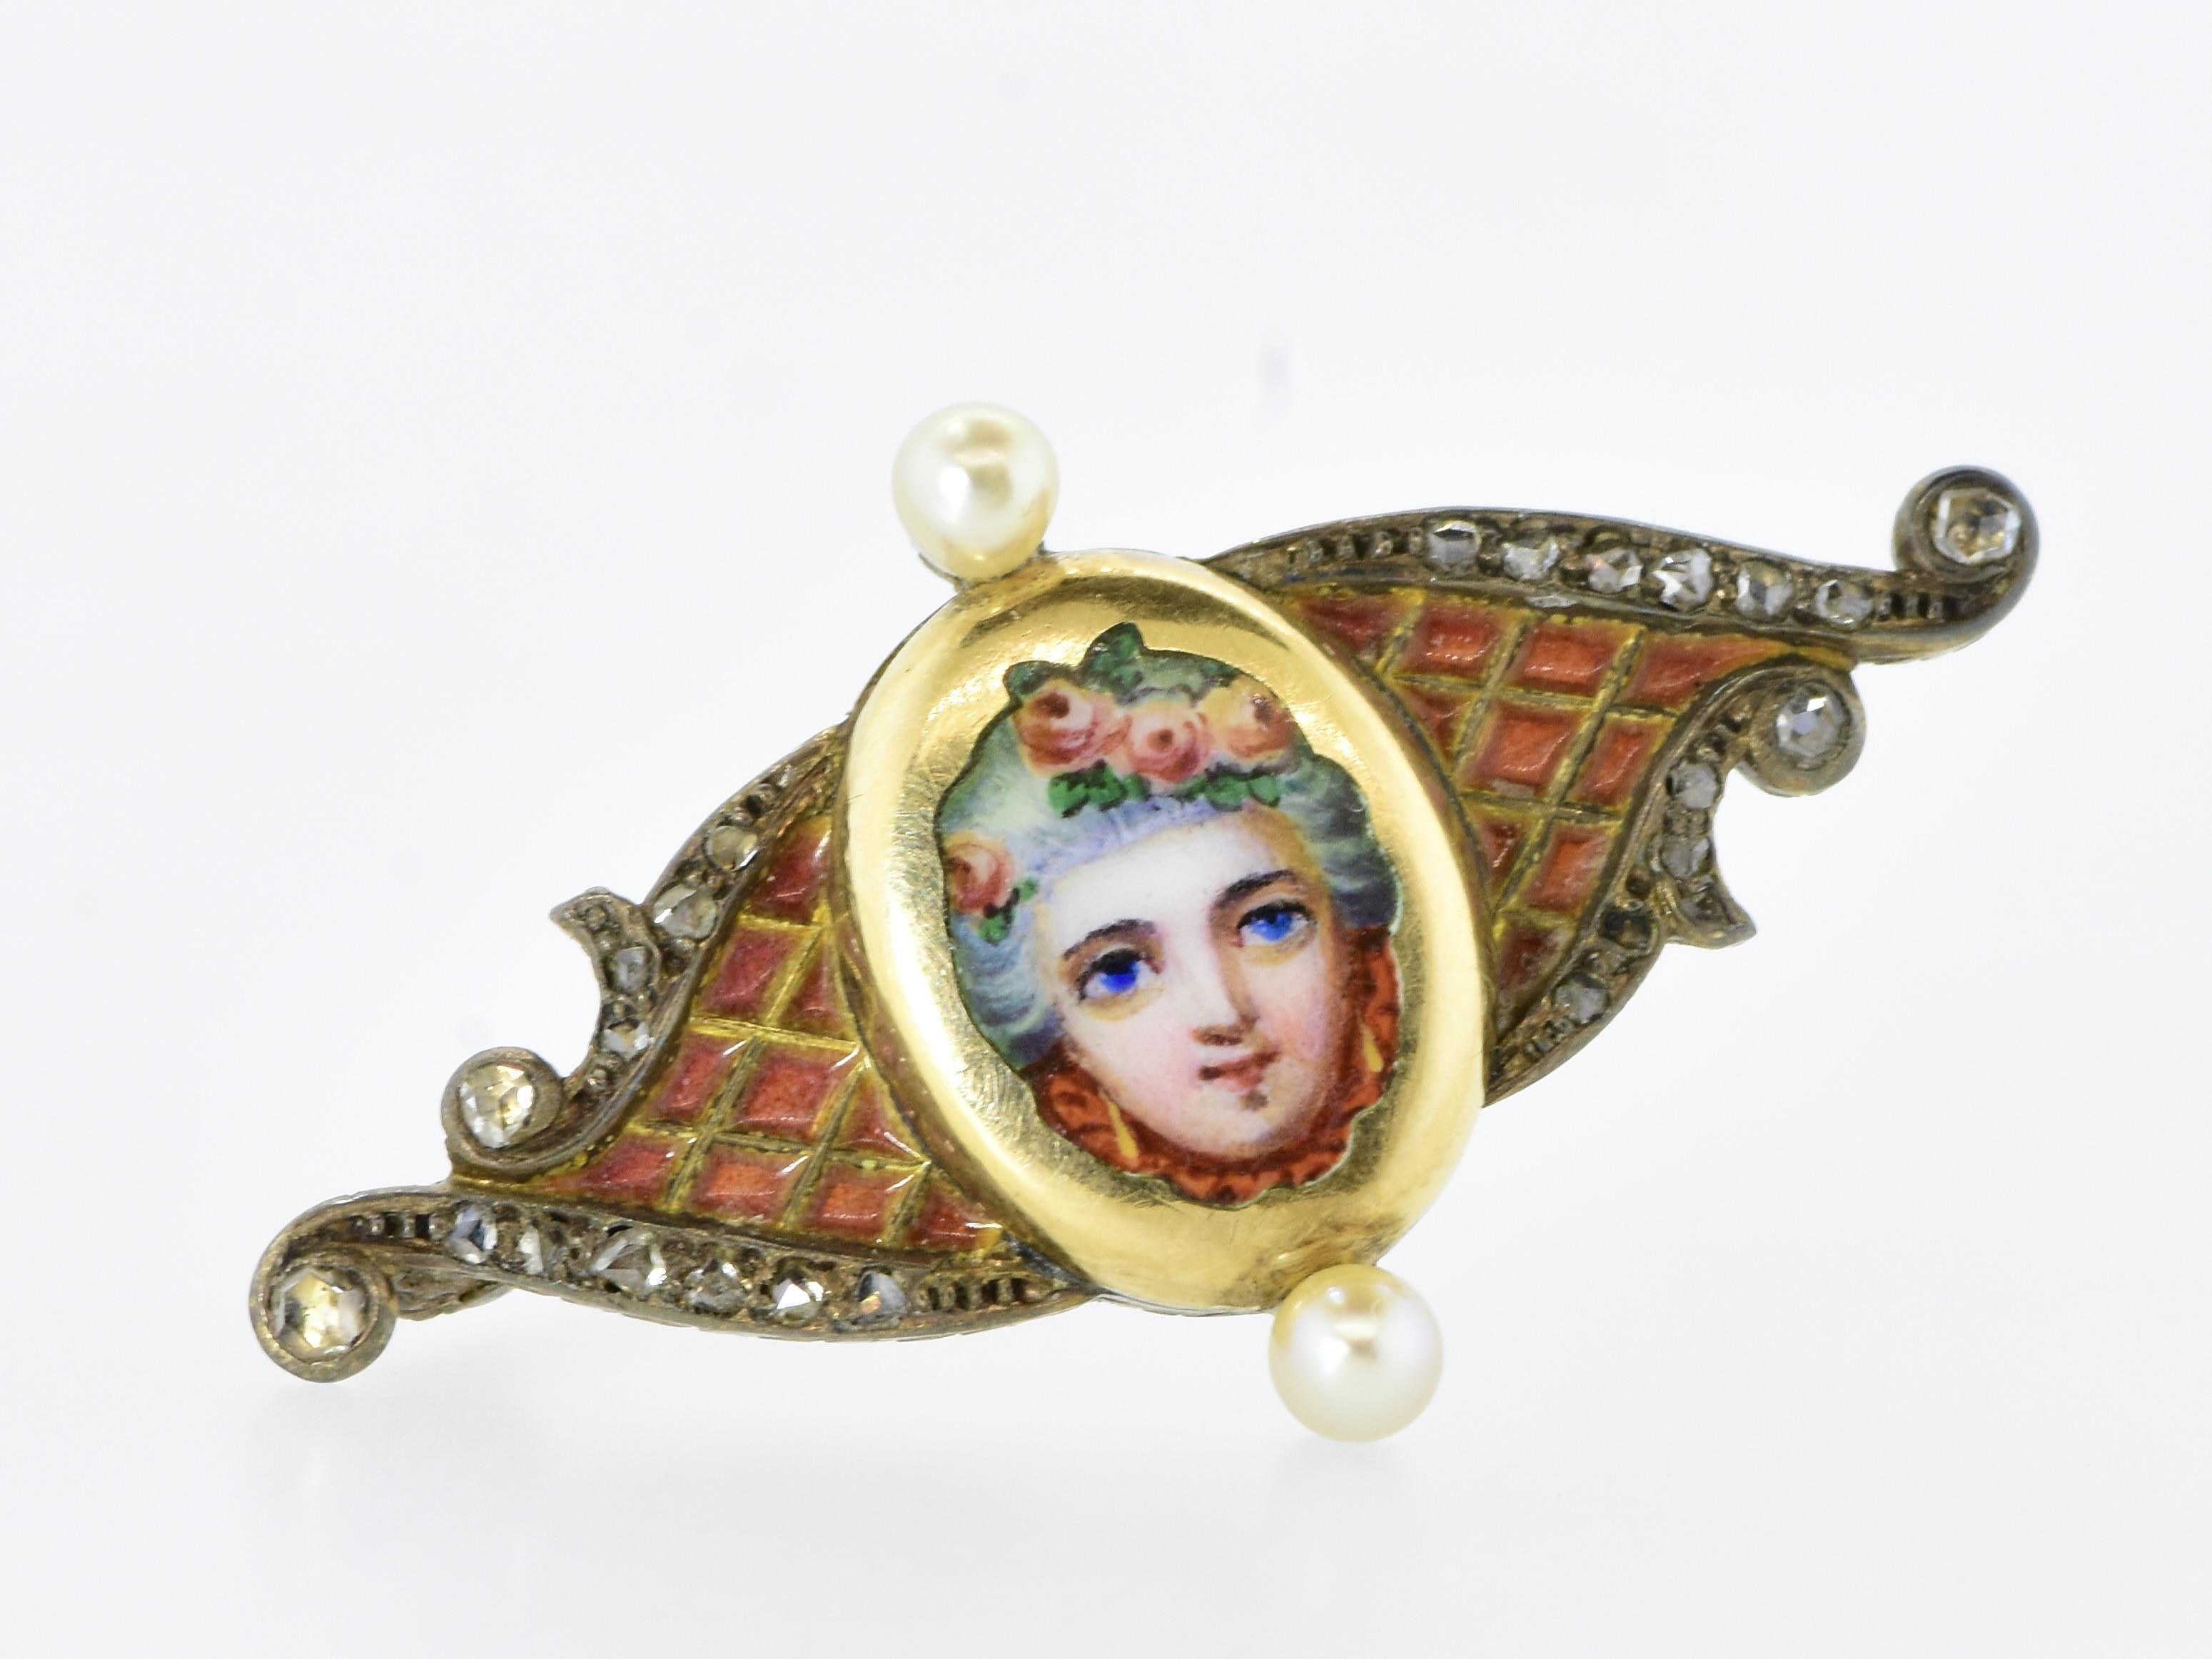 Antique portrait and transparent enamel brooch with rose cut diamonds and natural pearls.  This charming antique piece is both gold and silver, it is 1.5 inches long and .5 inches high.  The back of the brooch is highly engraved which includes the